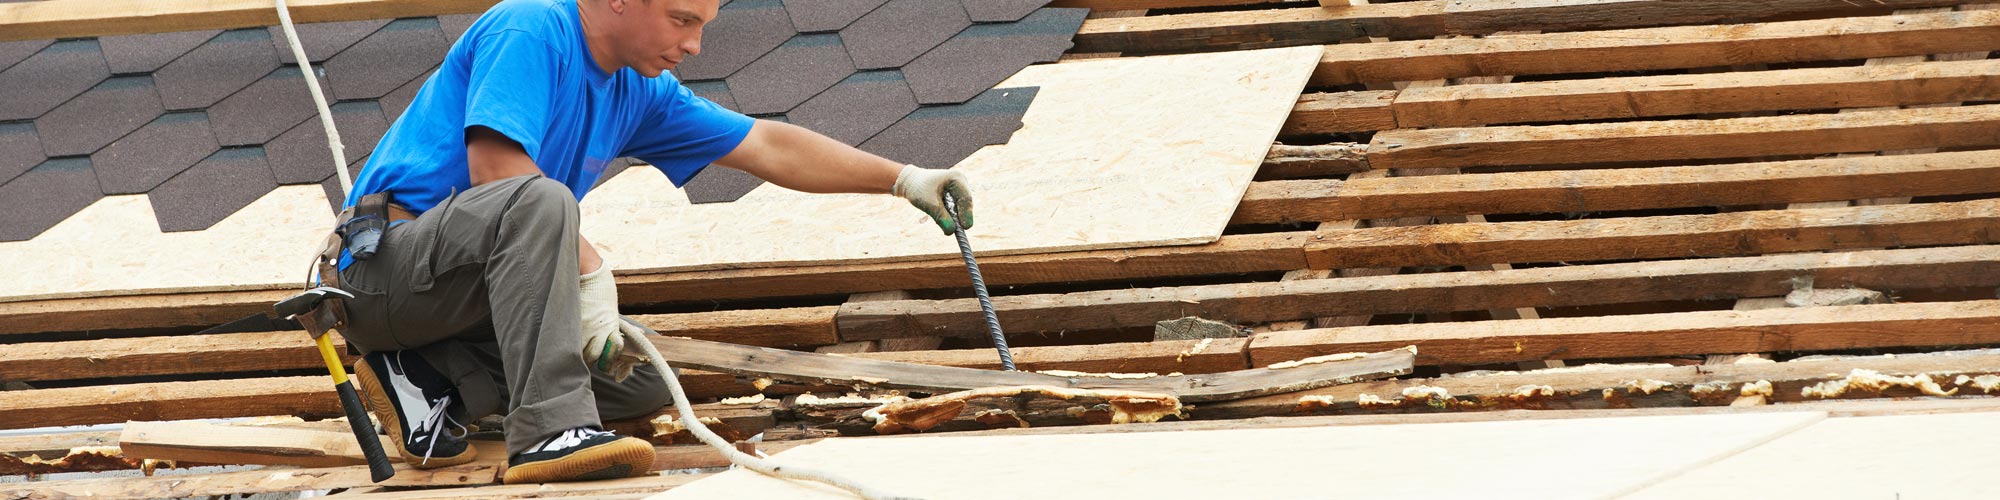 New Jersey Roofer - American Roofing Service